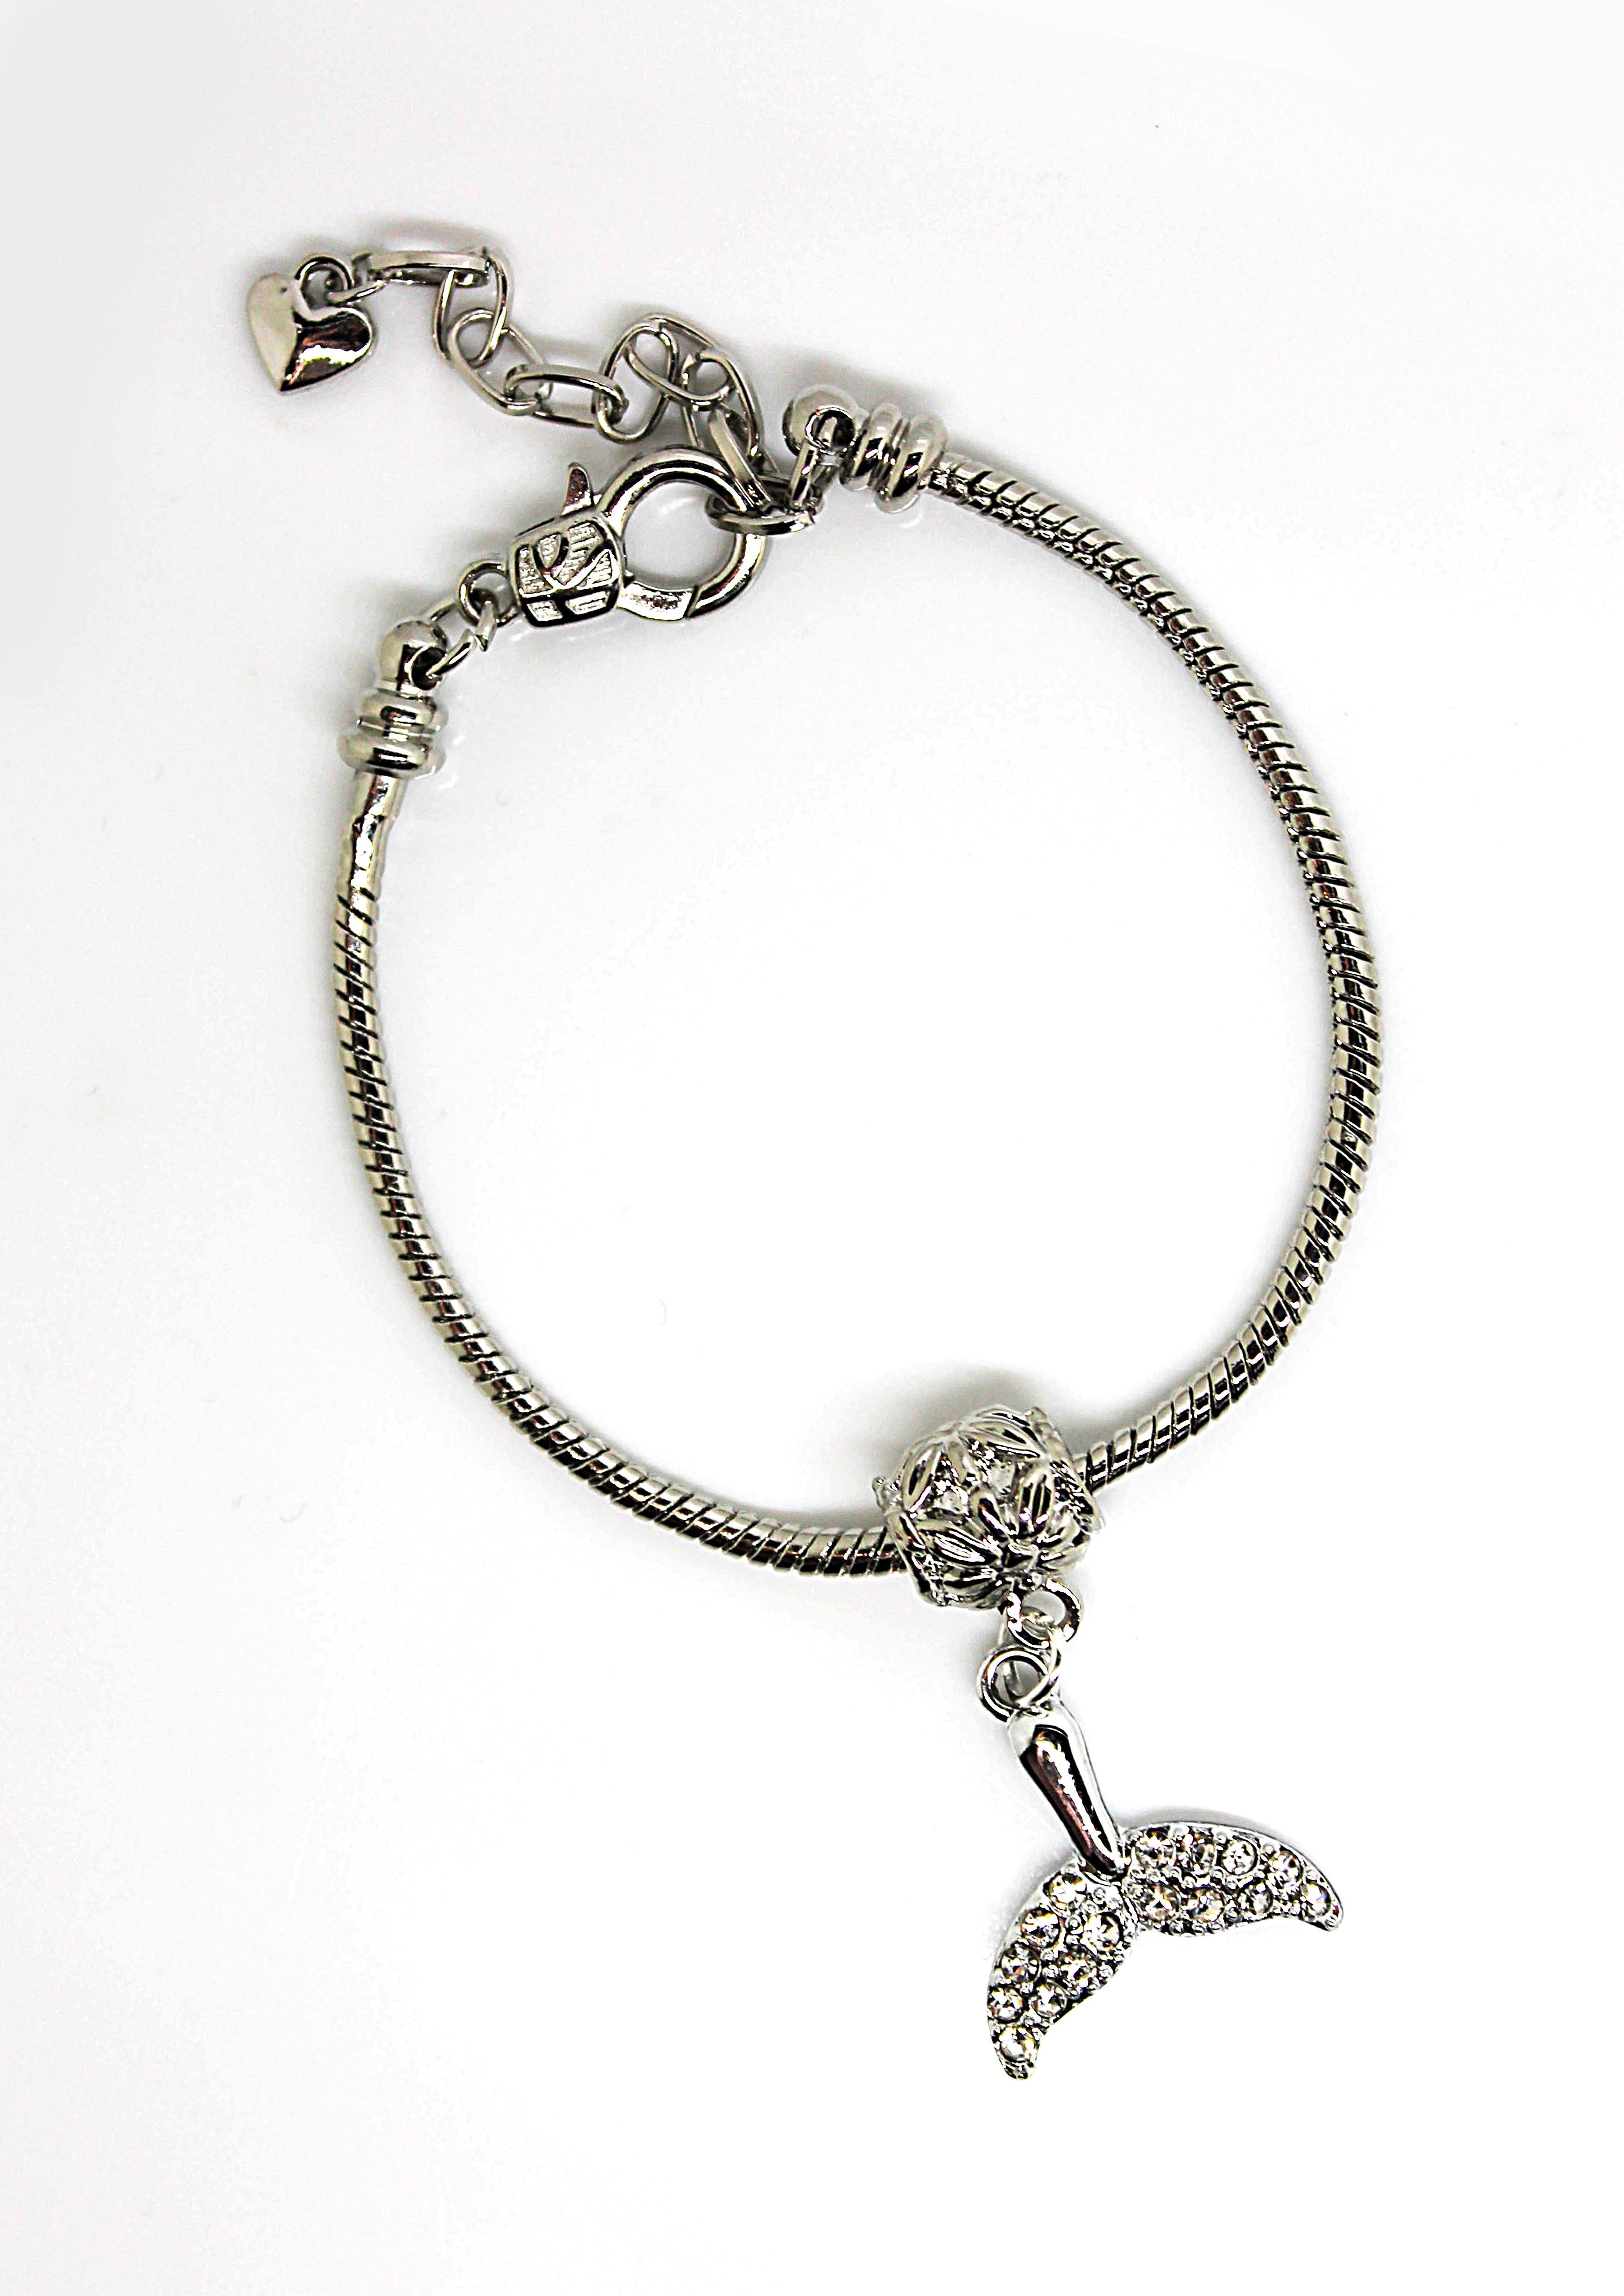 Whale Tail Charm Bracelet - Wildtouch - Wildtouch